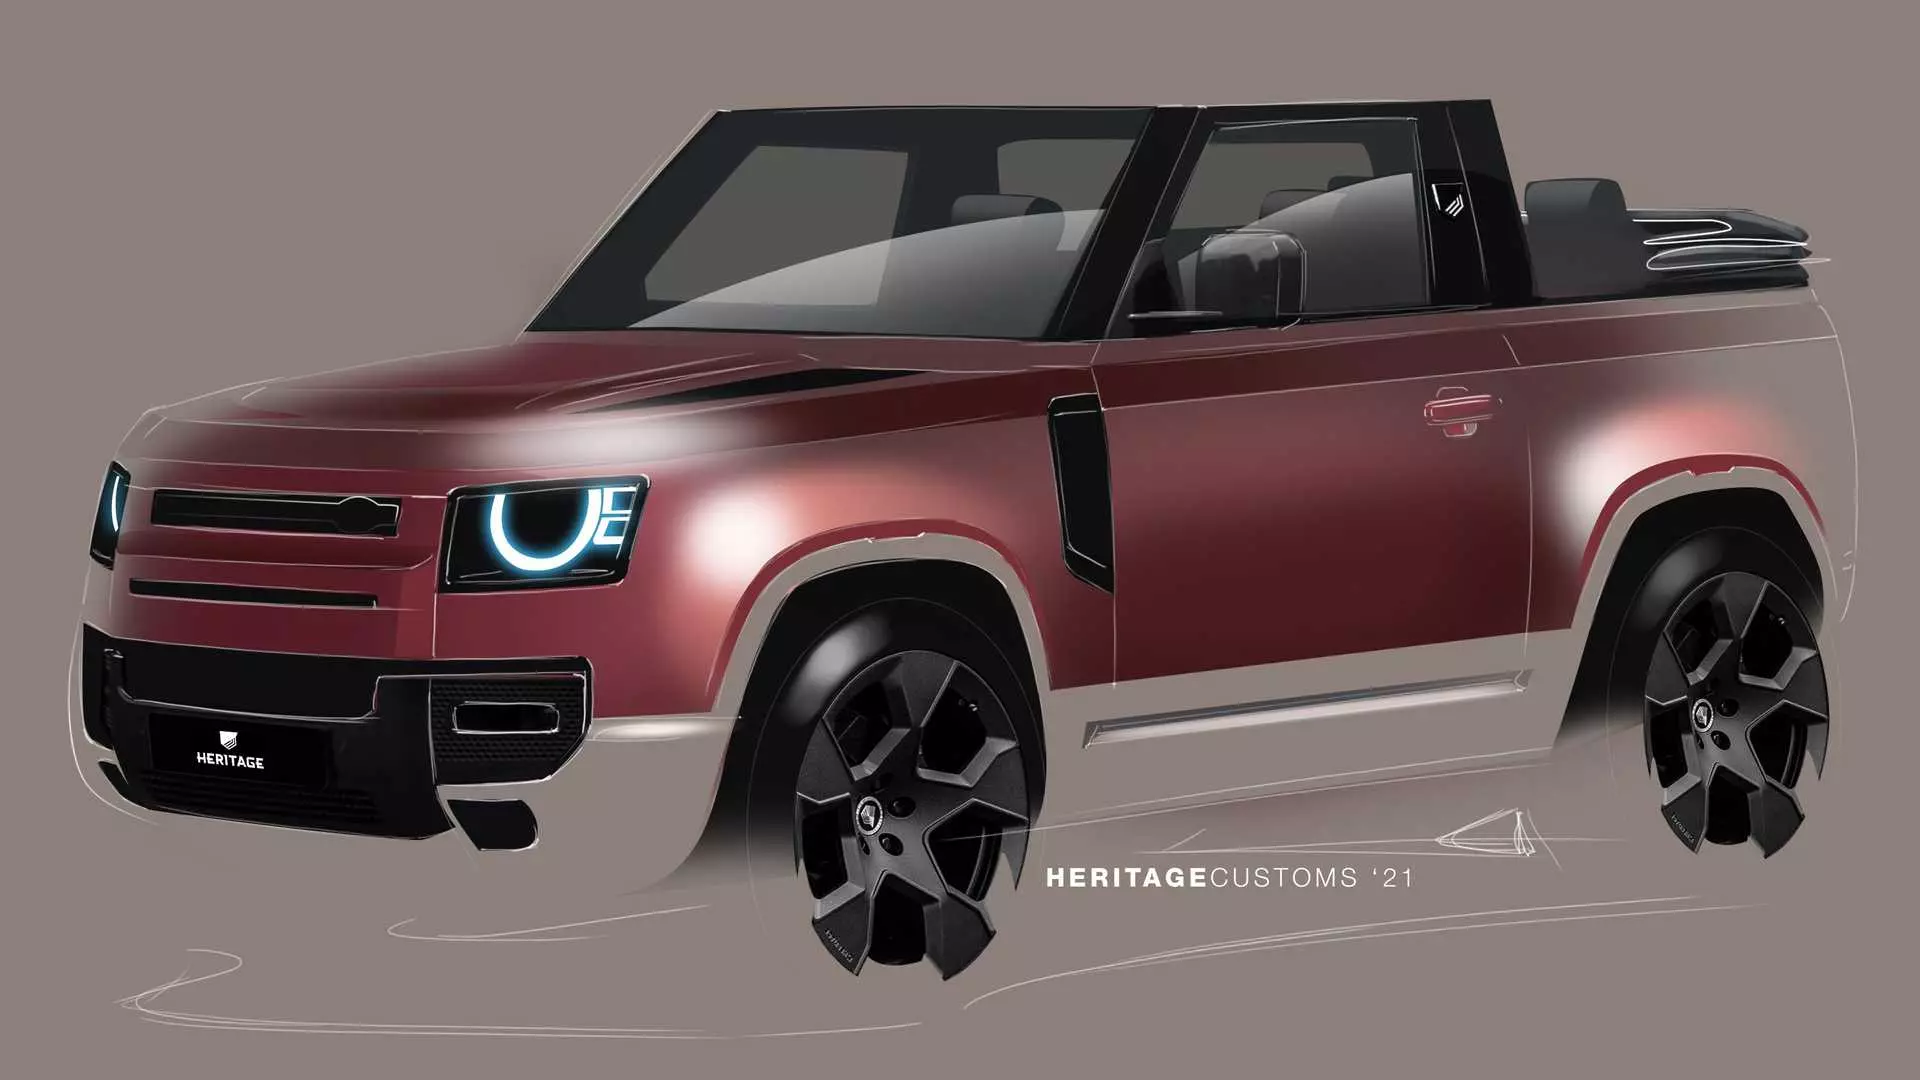 2022 Defender Convertible Price Announced